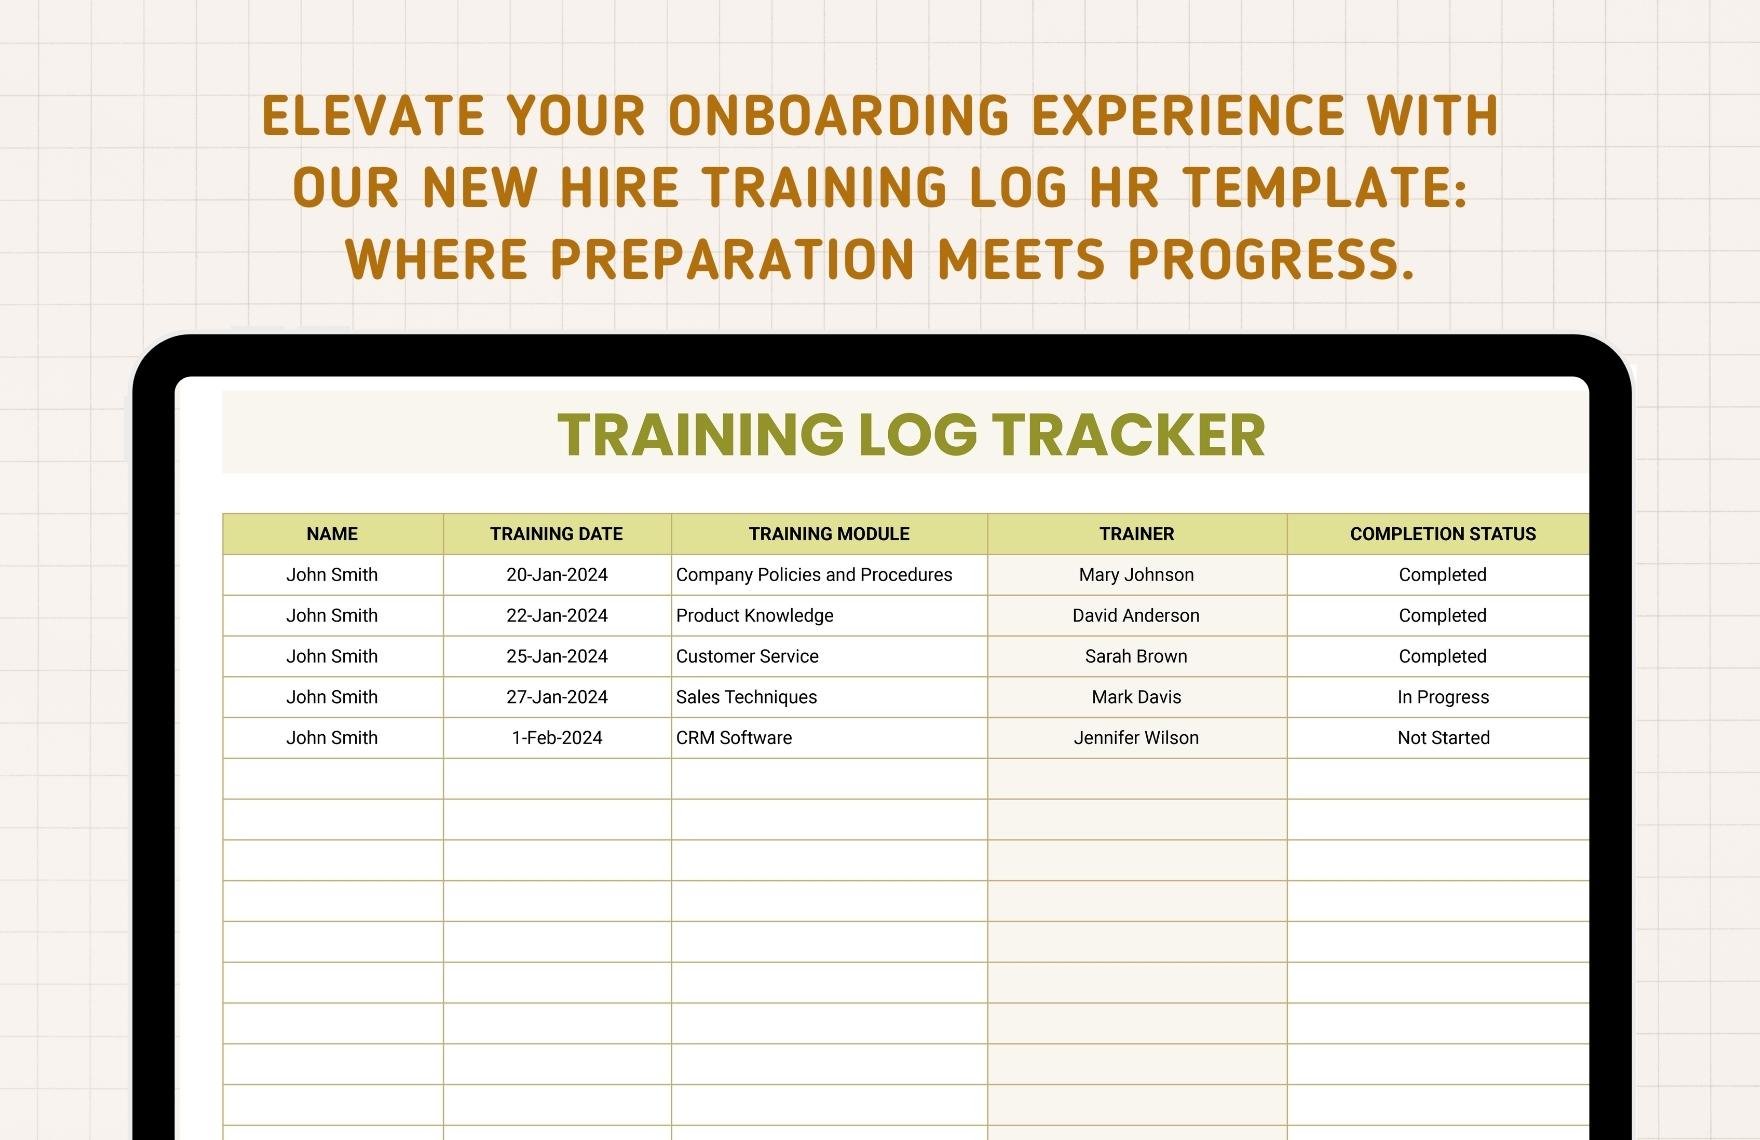 New Hire Training Log HR Template